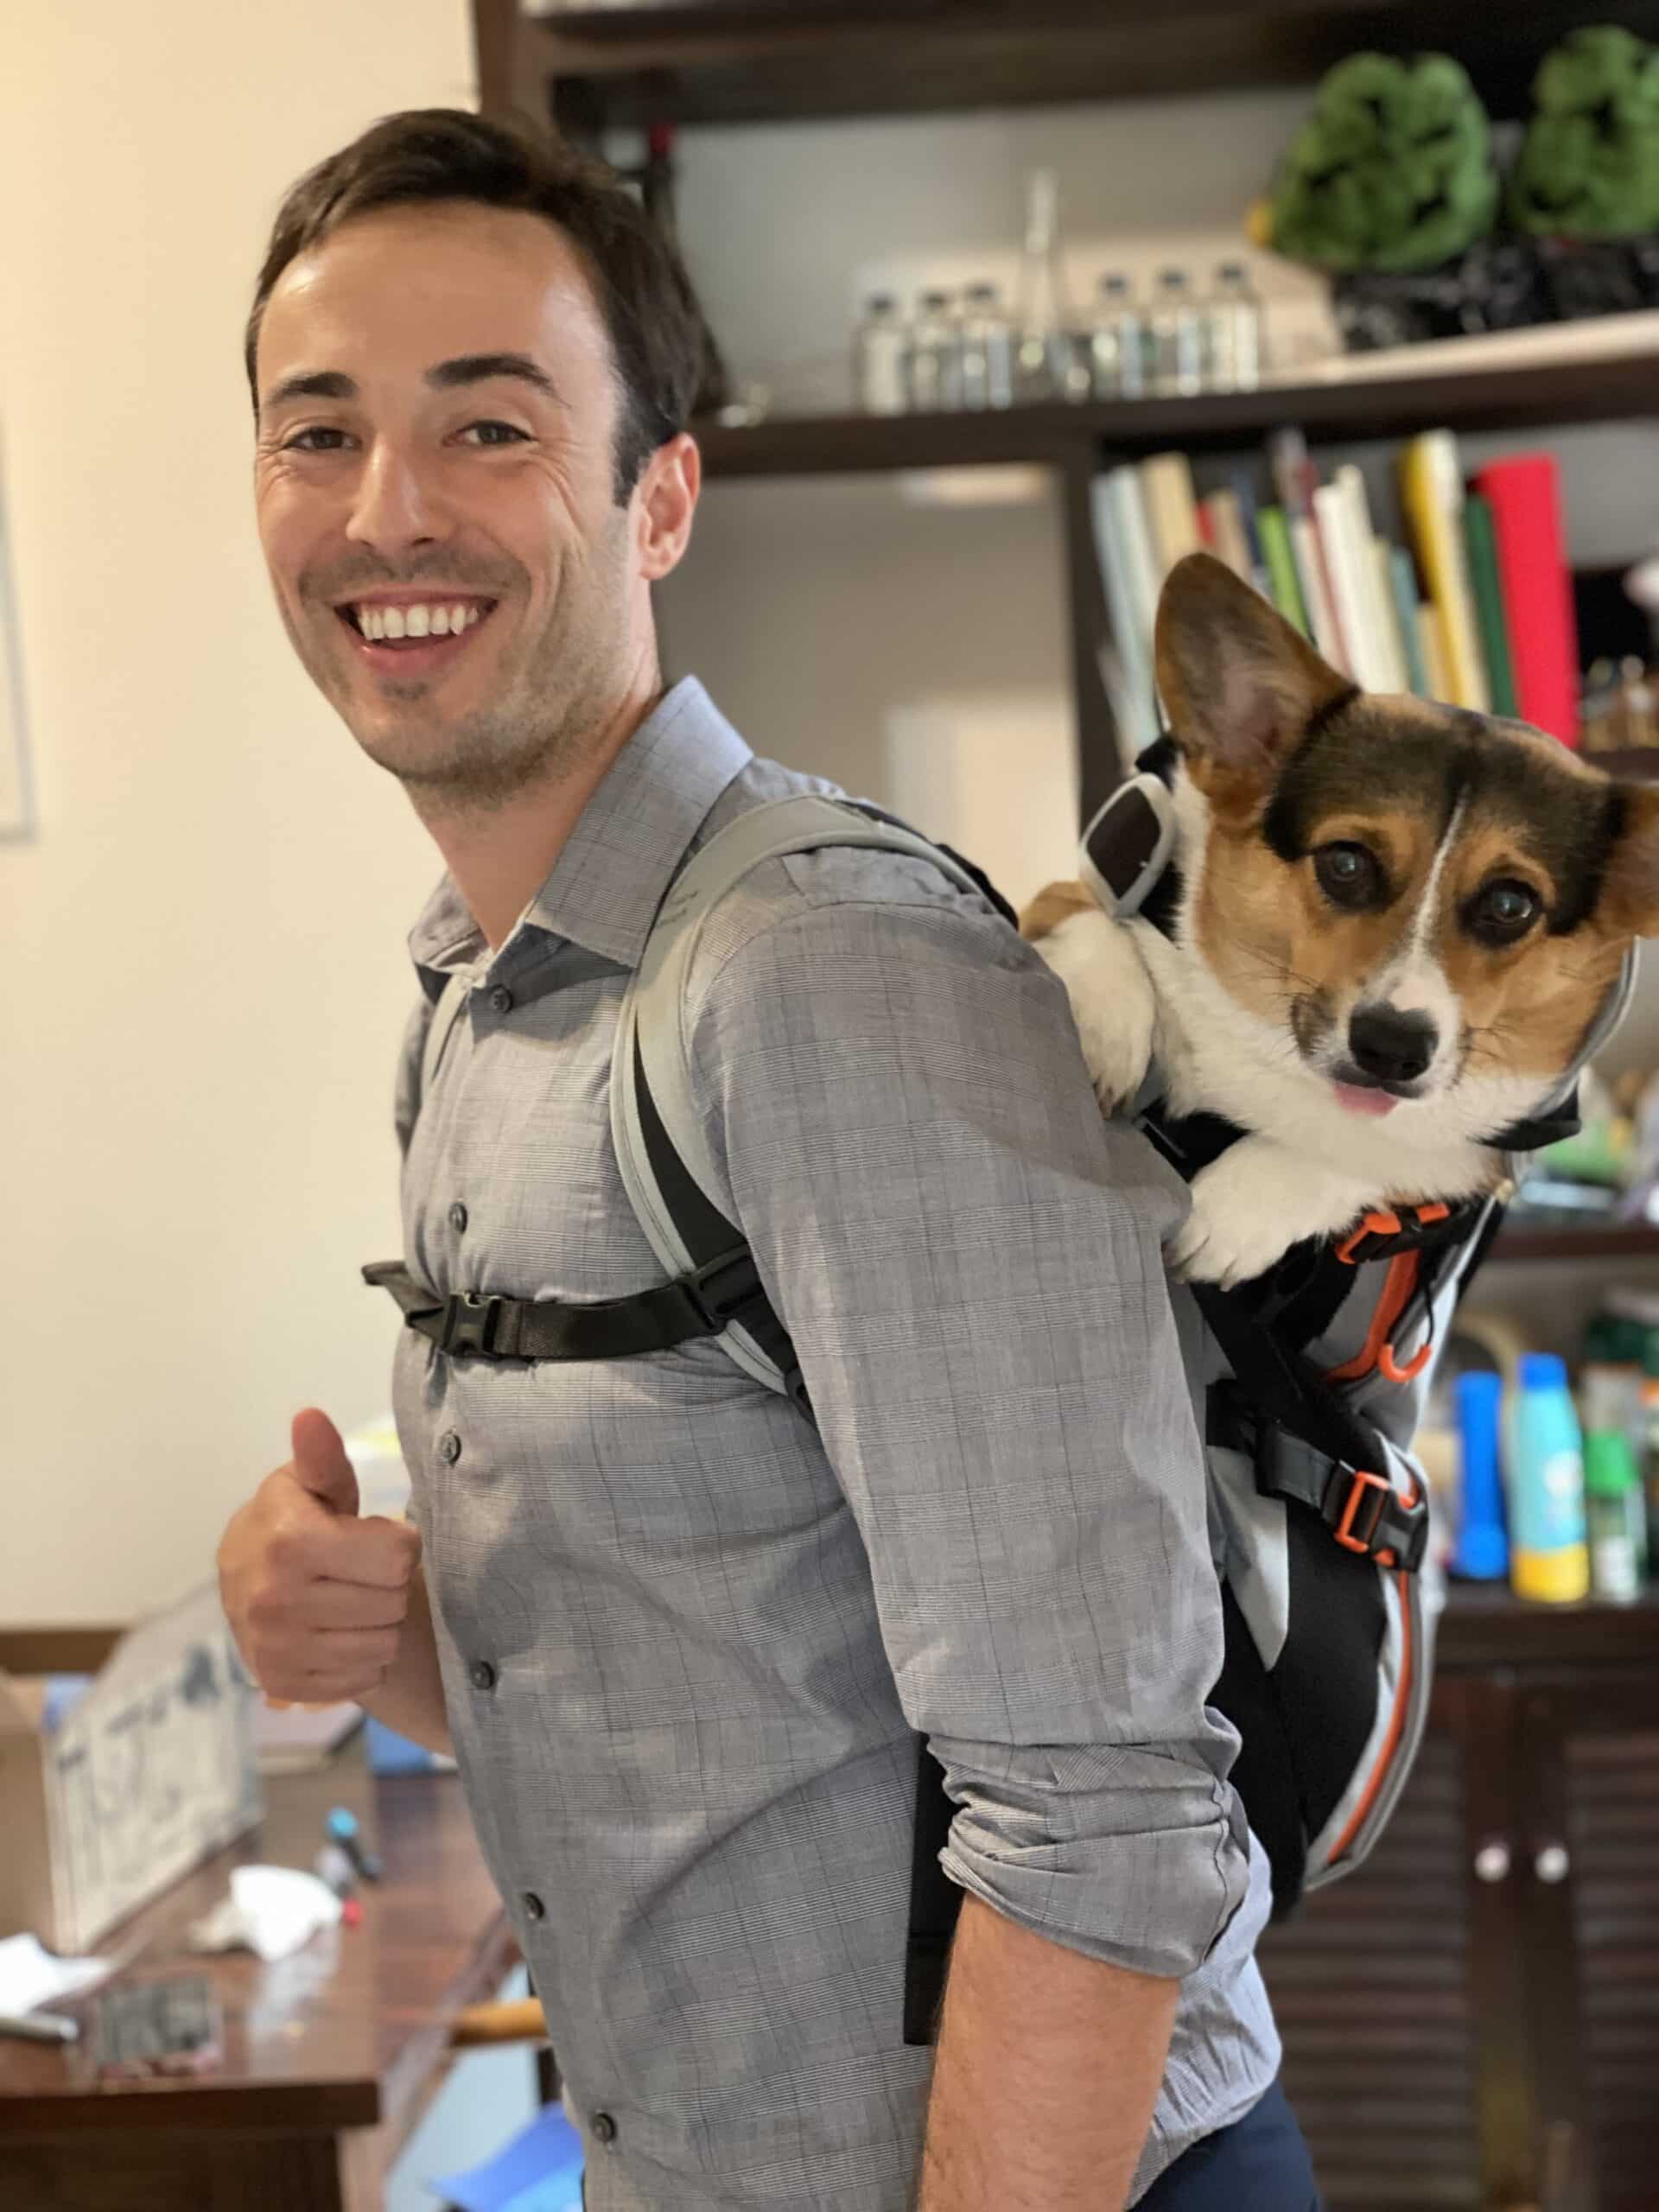 Dillon with his dog in a backpack.